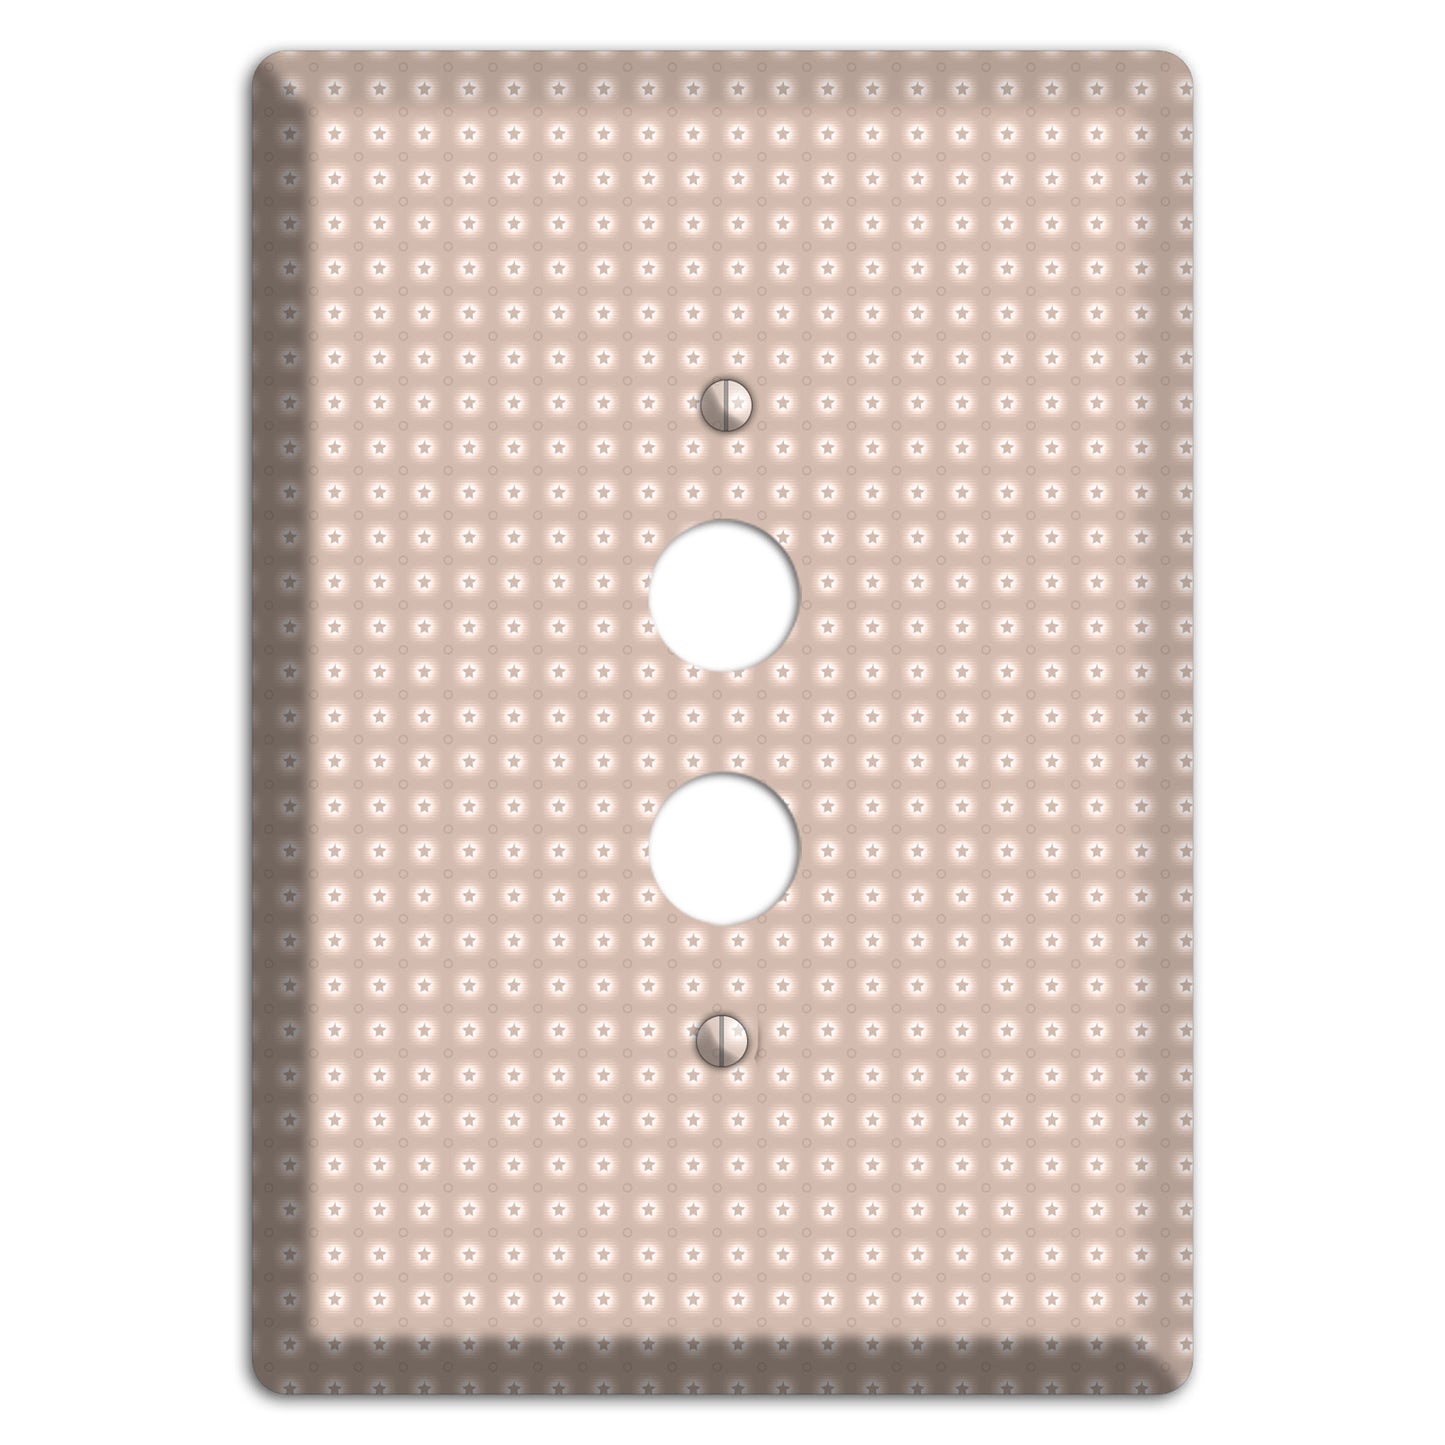 Beige with Circled Stars 1 Pushbutton Wallplate